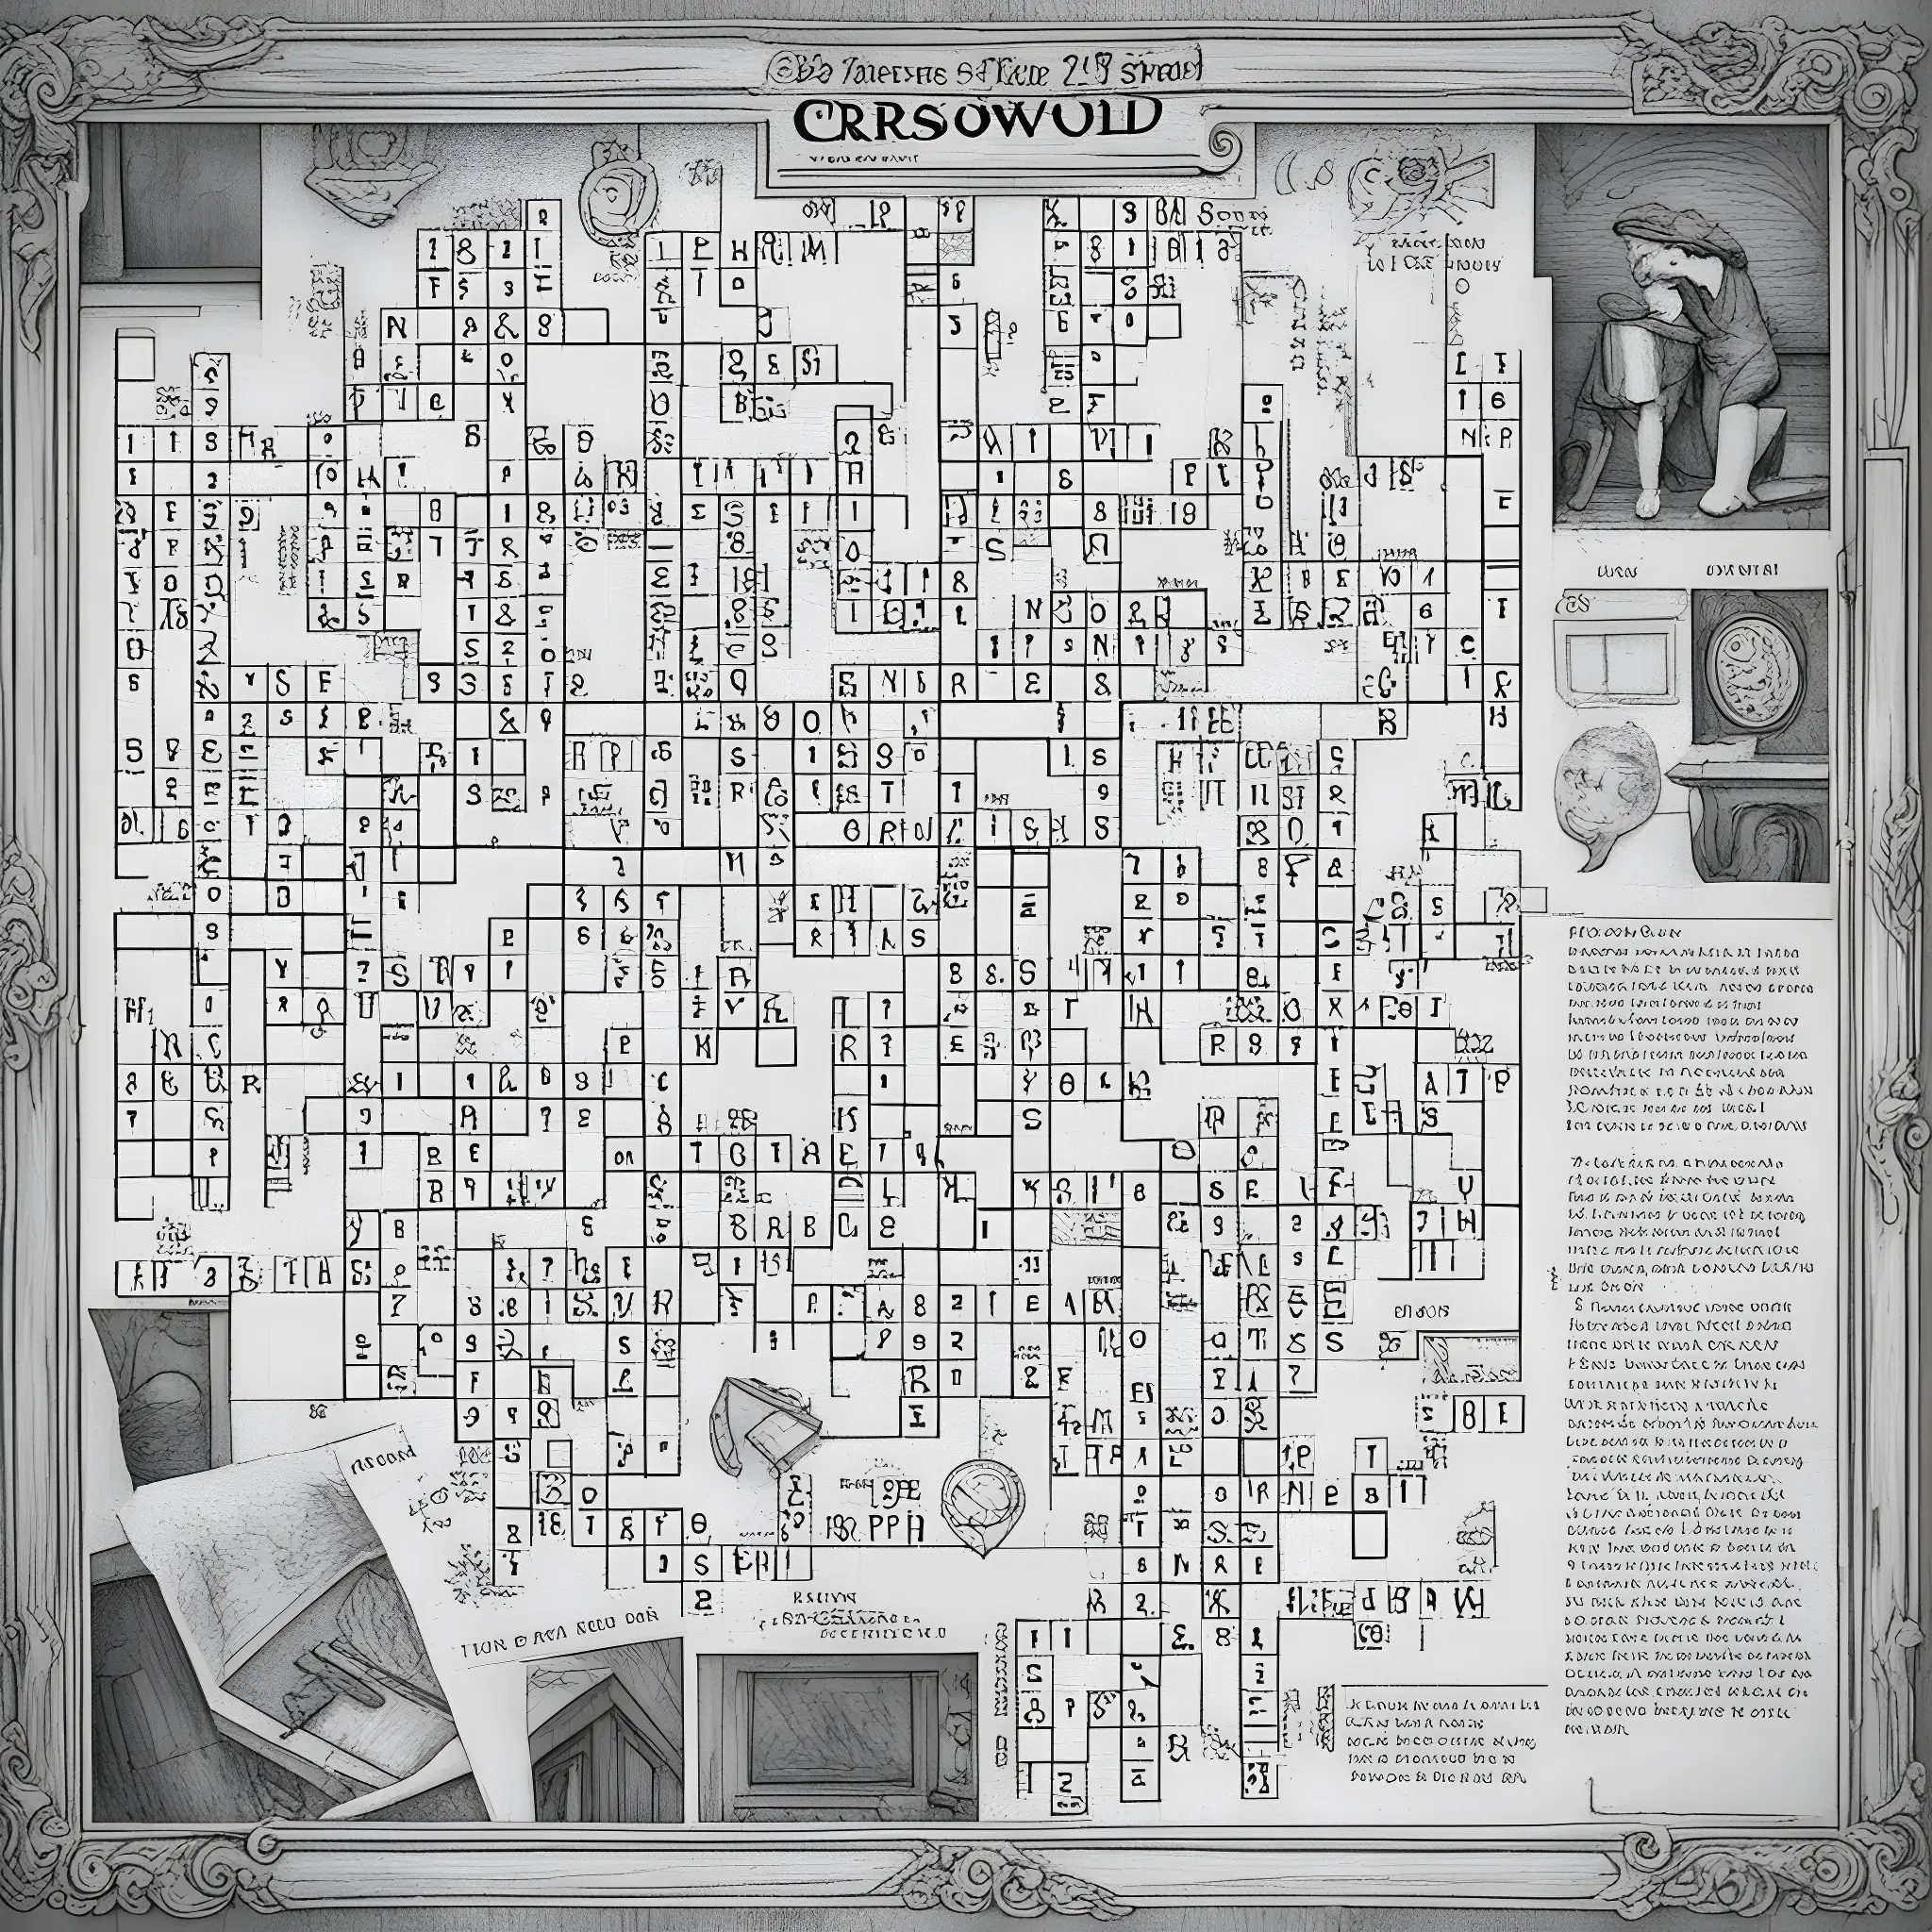 A highly detailed crossword puzzle Secure In A Way NYT with surrounding sketches, including a drawing of a man and woman, an antique radio, and various other elements.